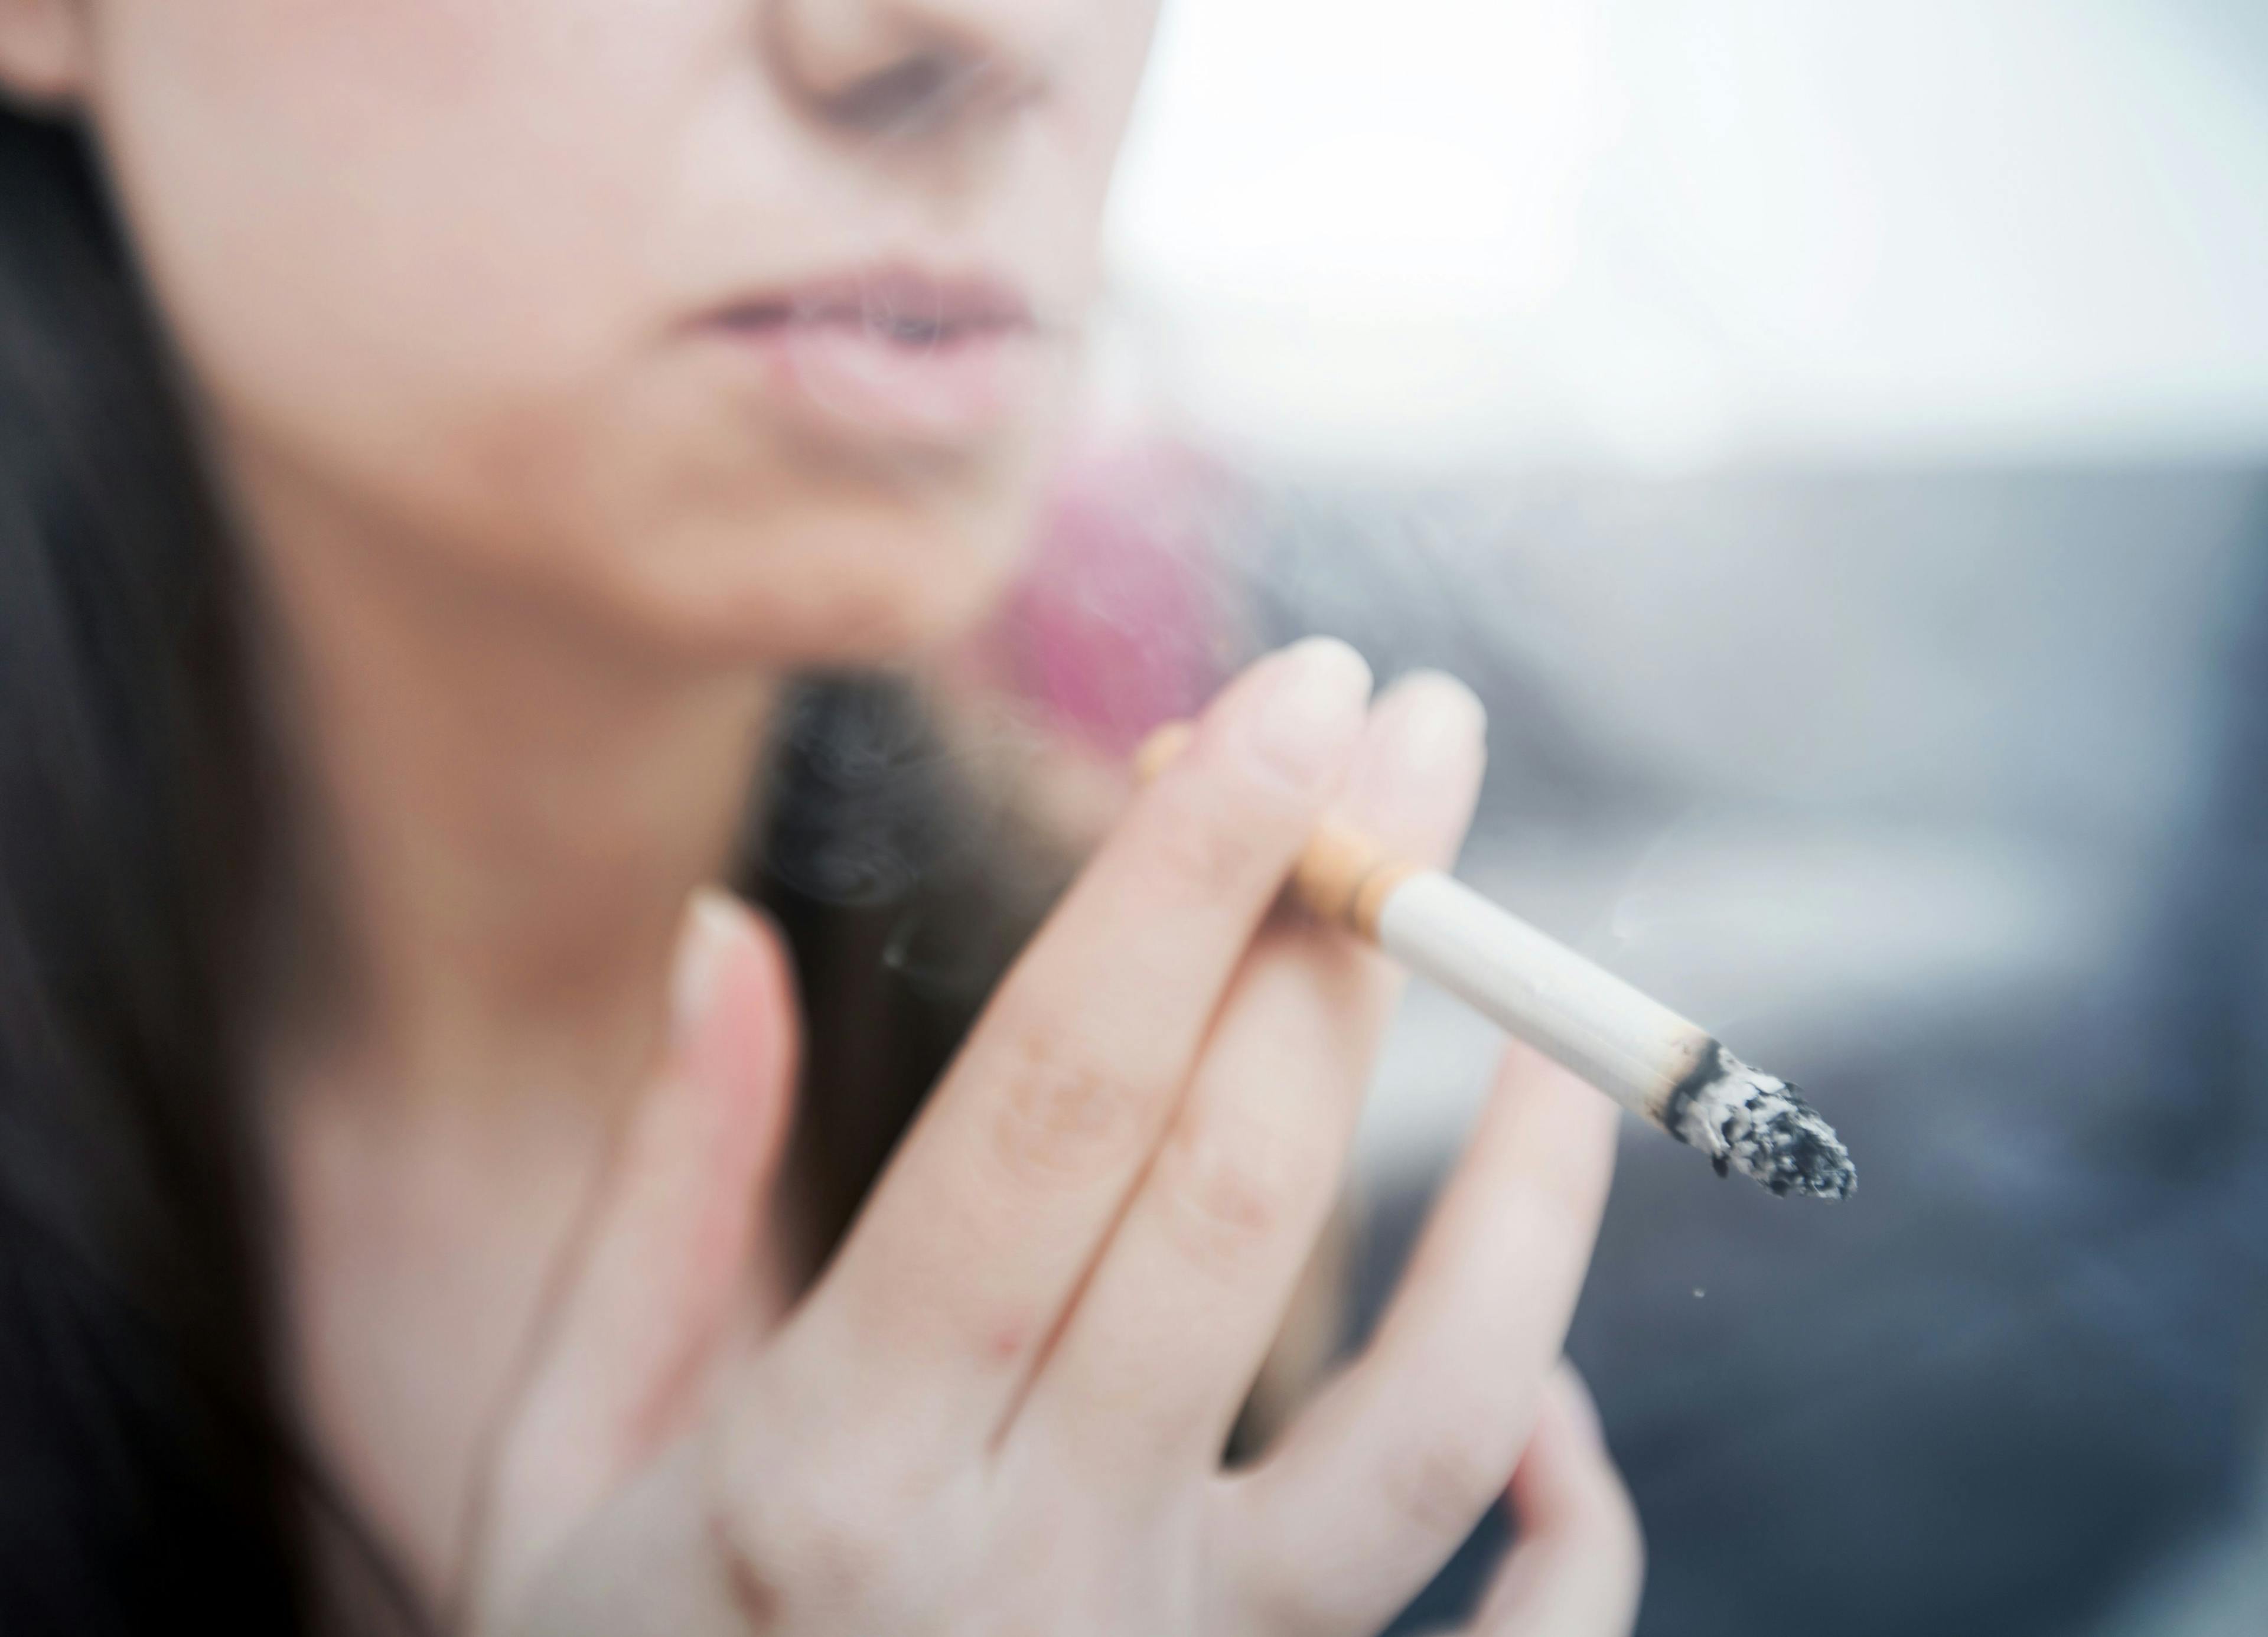 Smoking during pregnancy associated with smaller brain volume in child